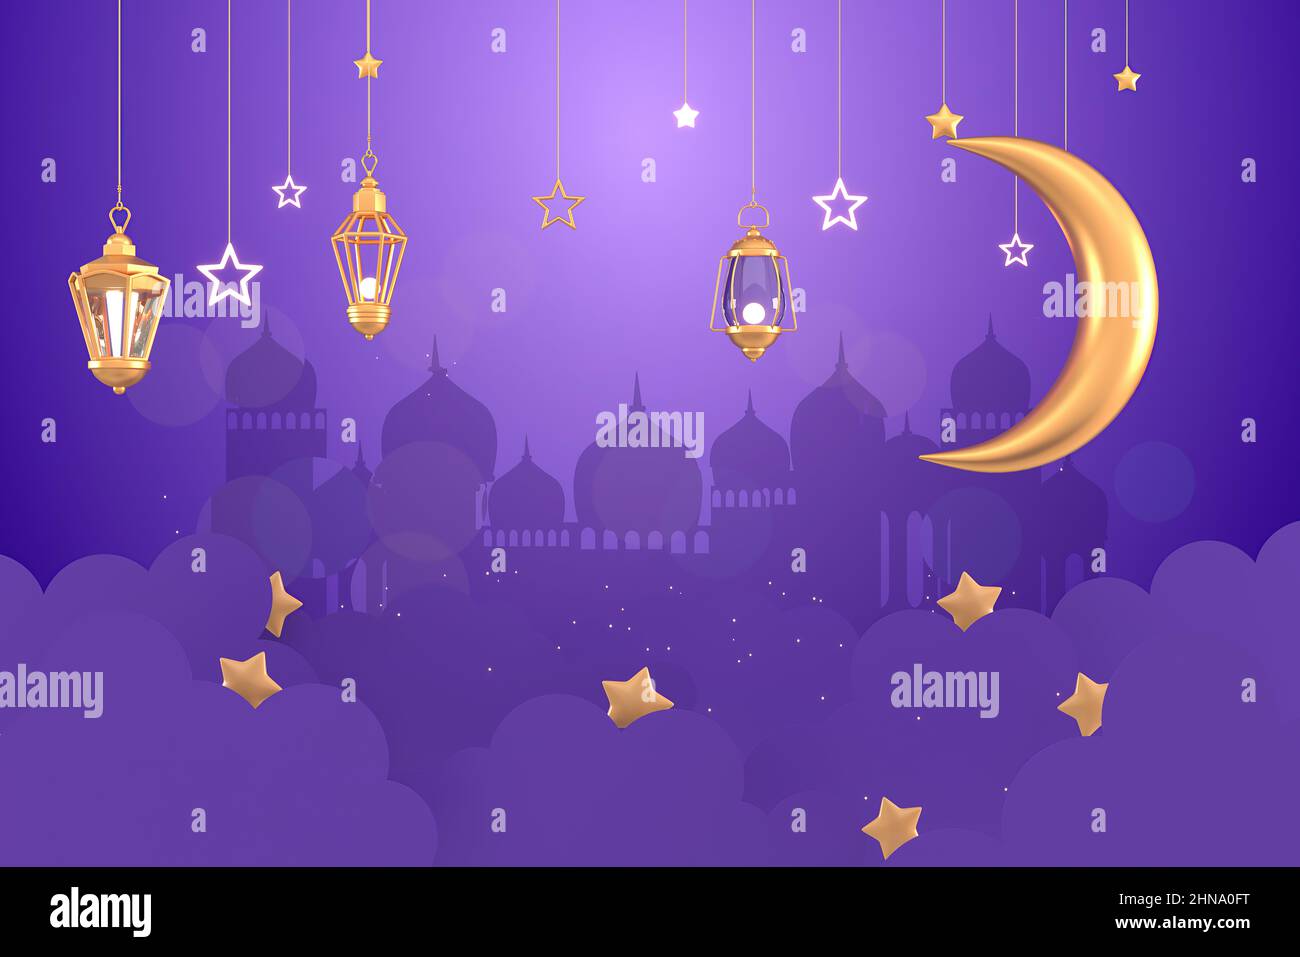 Ramadan kareem islamic background with mosque and arabic lantern posters  for the wall • posters night scene, purple, copy space